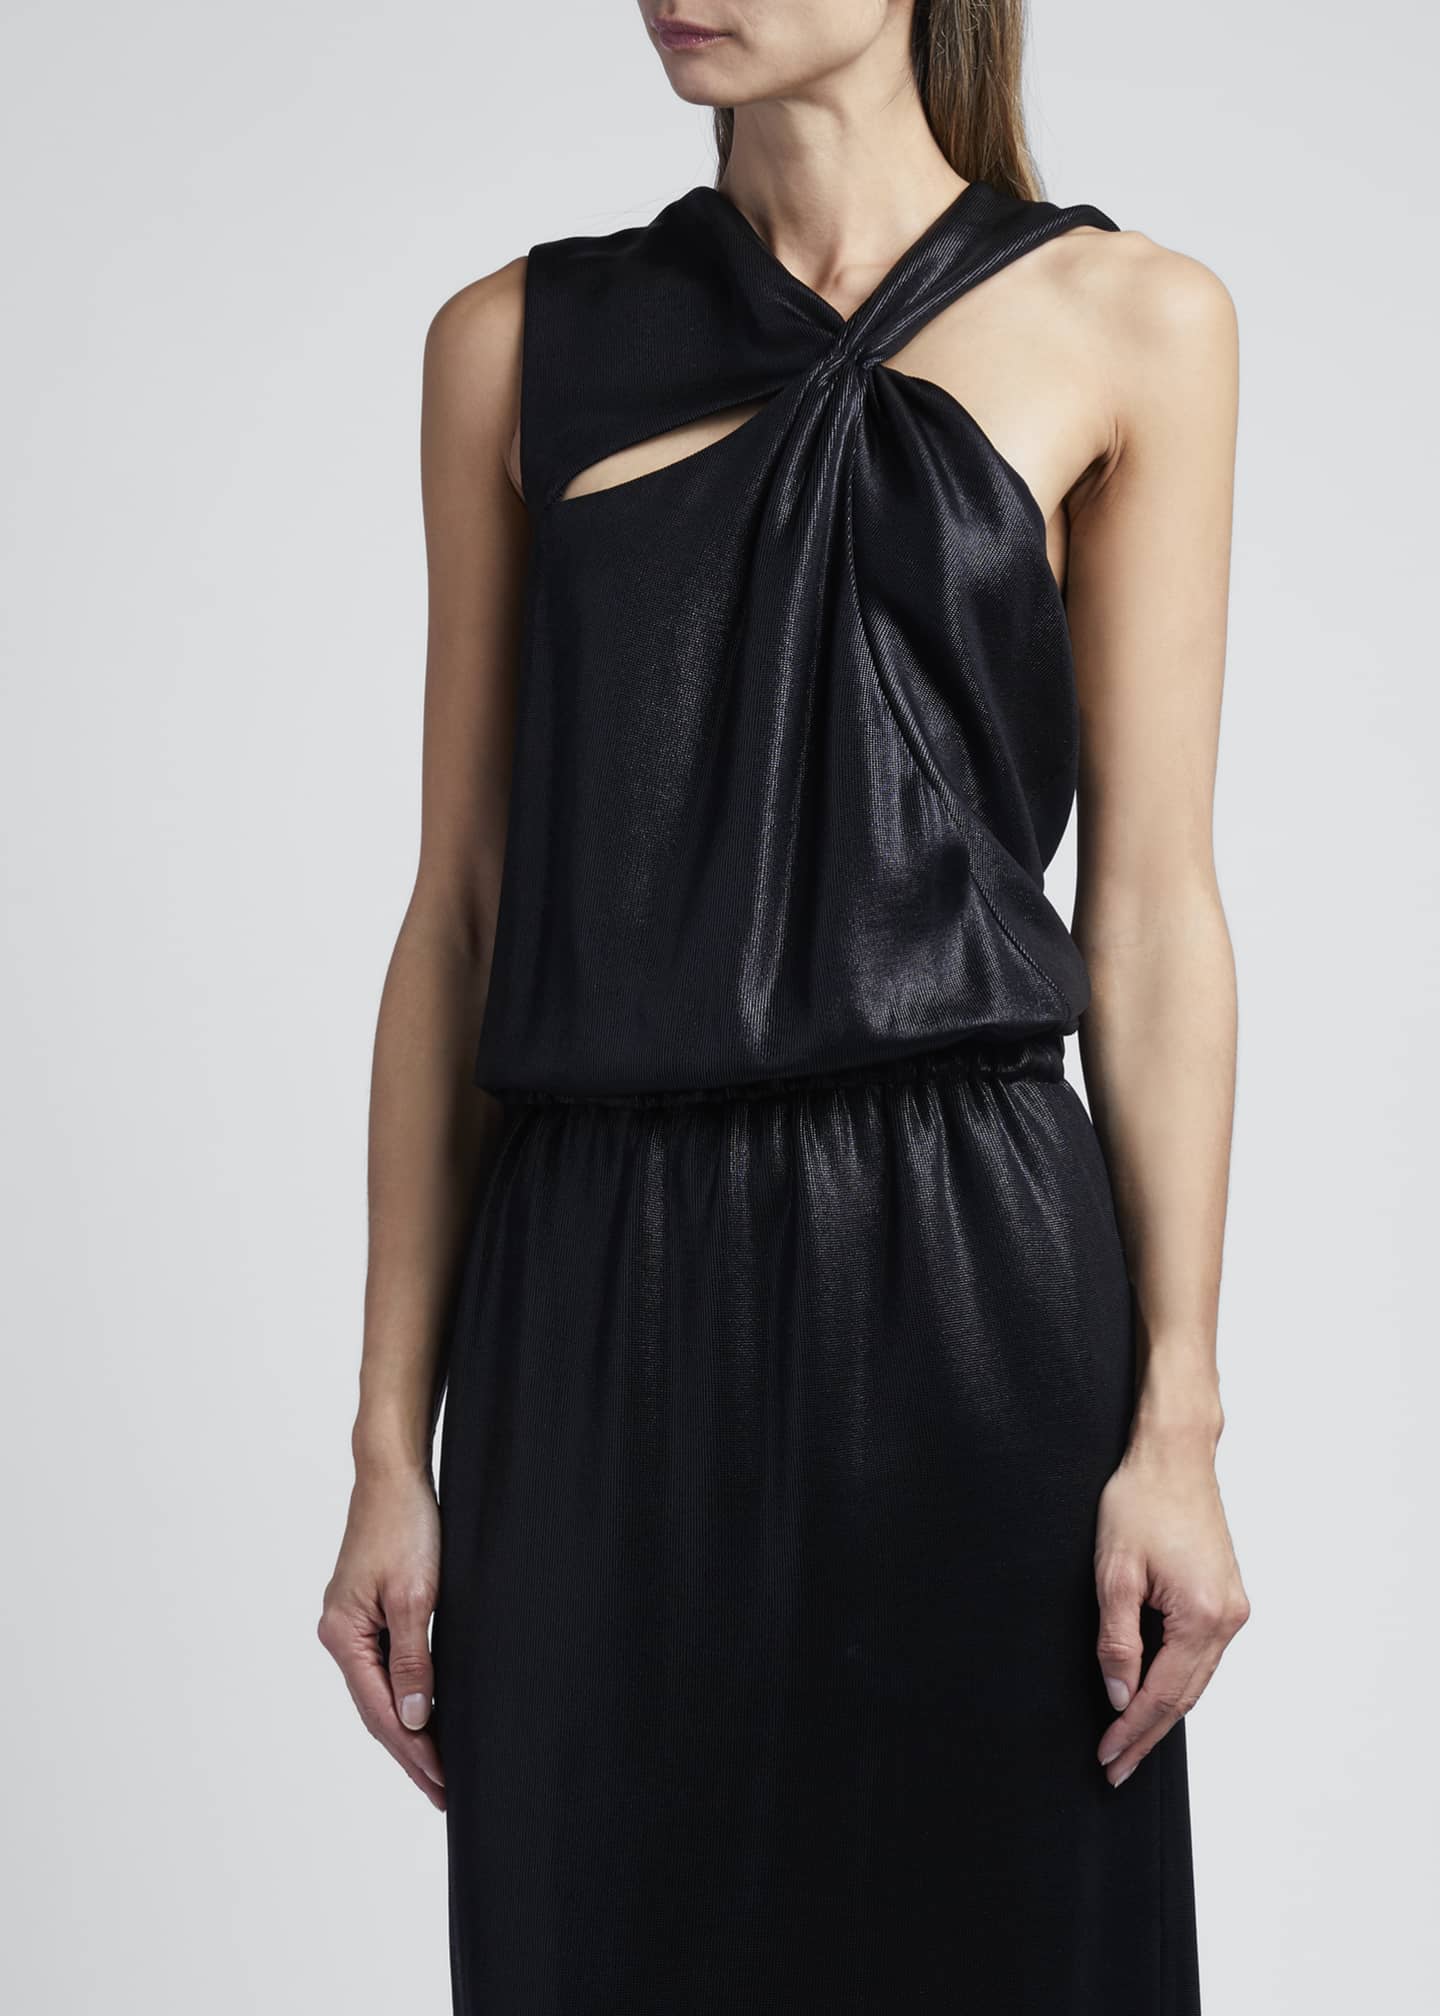 TOM FORD Sleeveless Cutout Laminated Jersey Gown - Bergdorf Goodman